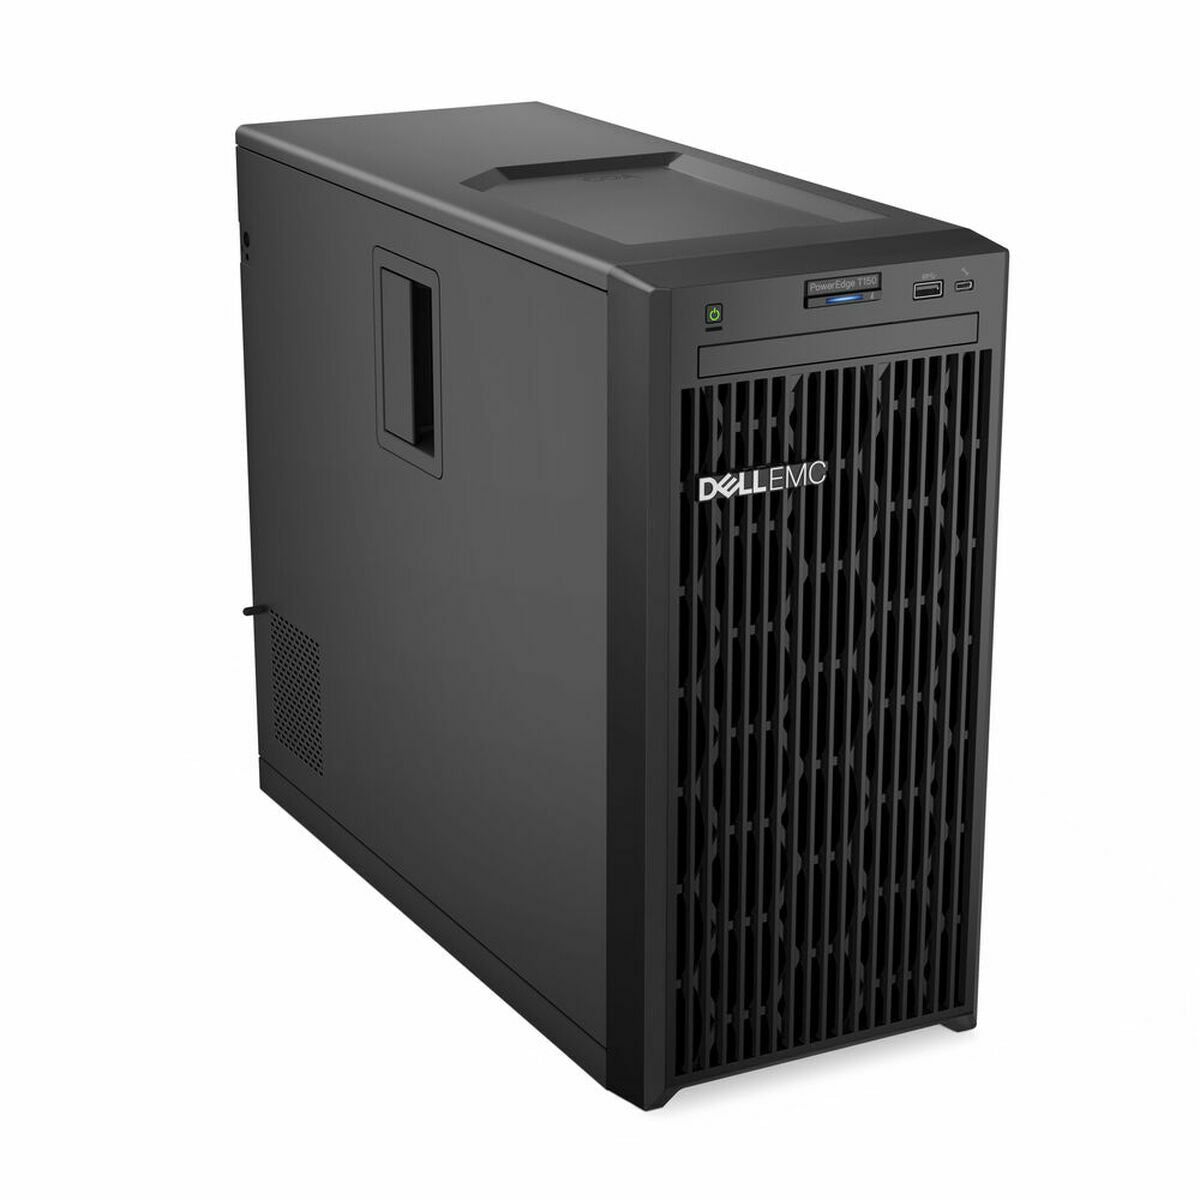 Server Tower Dell T150 16 GB RAM Xeon E-2334 2 TB SSD 2 TB HDD, Dell, Computing, server-tower-dell-t150-xeon-e-2334-2-tb-16-gb-ddr4, :2 TB, Brand_Dell, category-reference-2609, category-reference-2791, category-reference-2799, category-reference-t-19685, computers / components, Condition_NEW, office, Price_+ 1000, Teleworking, RiotNook